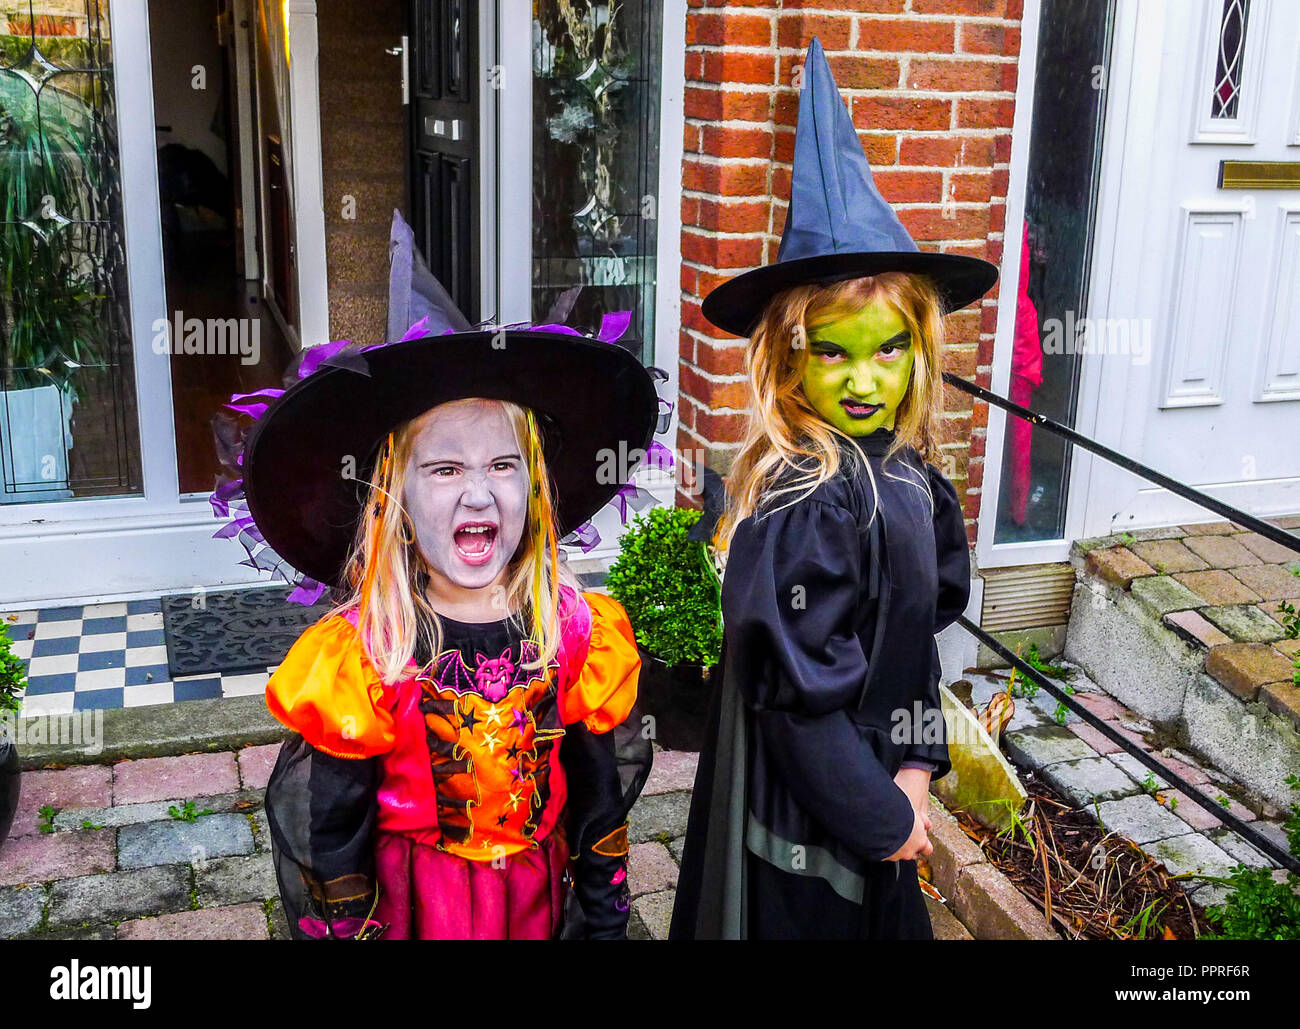 Little girls children dressed in Witches Halloween costume, wearing black witch hat, dresses, kids halloween costume, witch costume Stock Photo